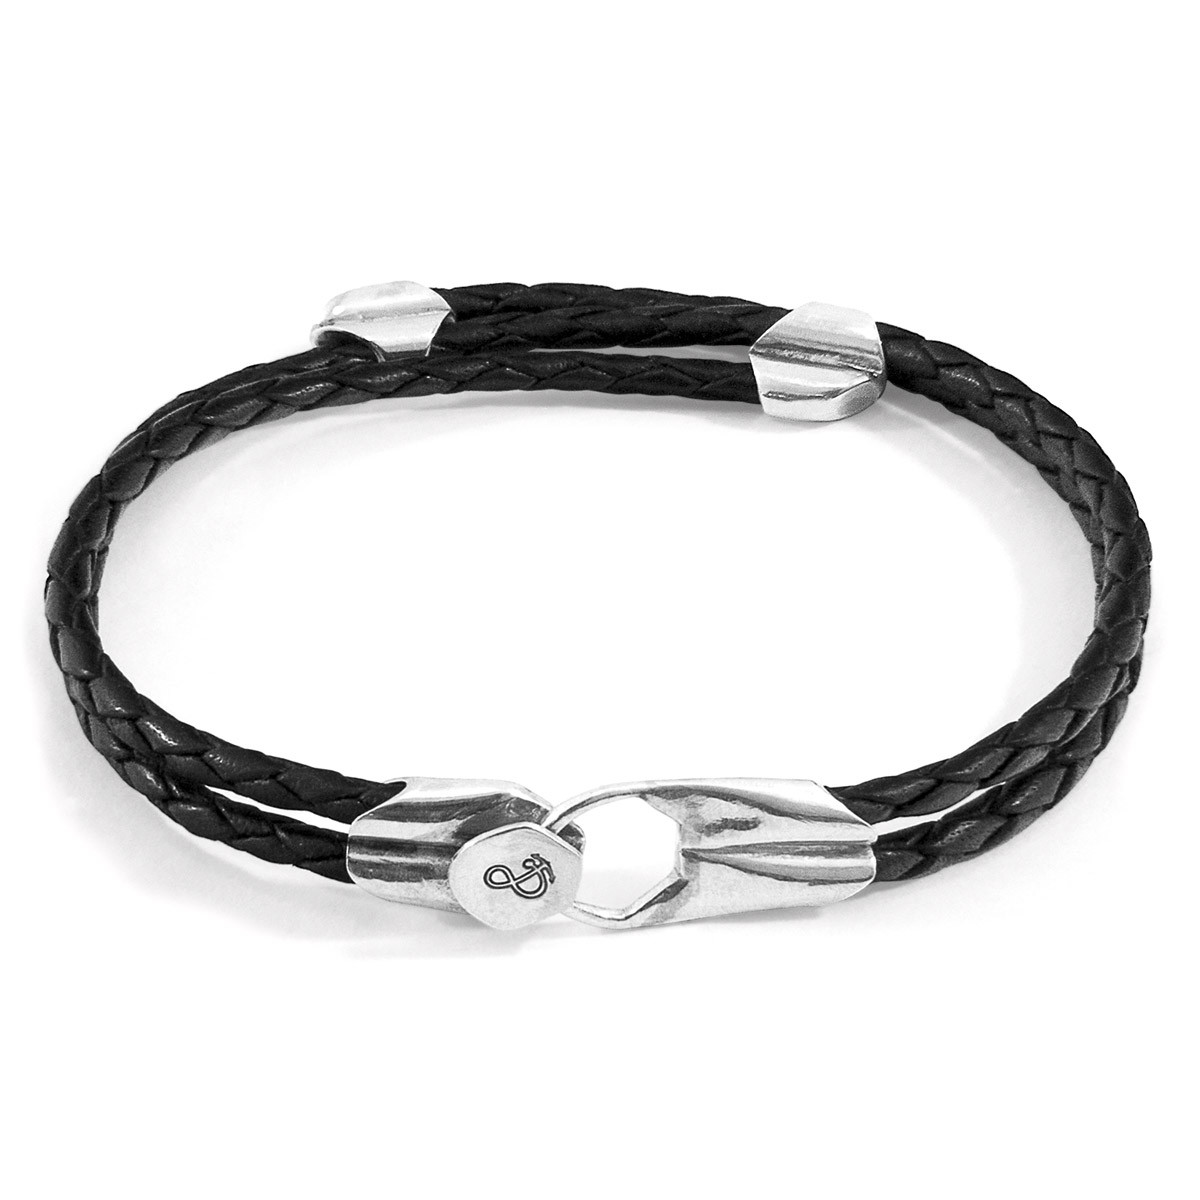 Coal Black Conway Silver and Braided Leather Bracelet | ANCHOR & CREW